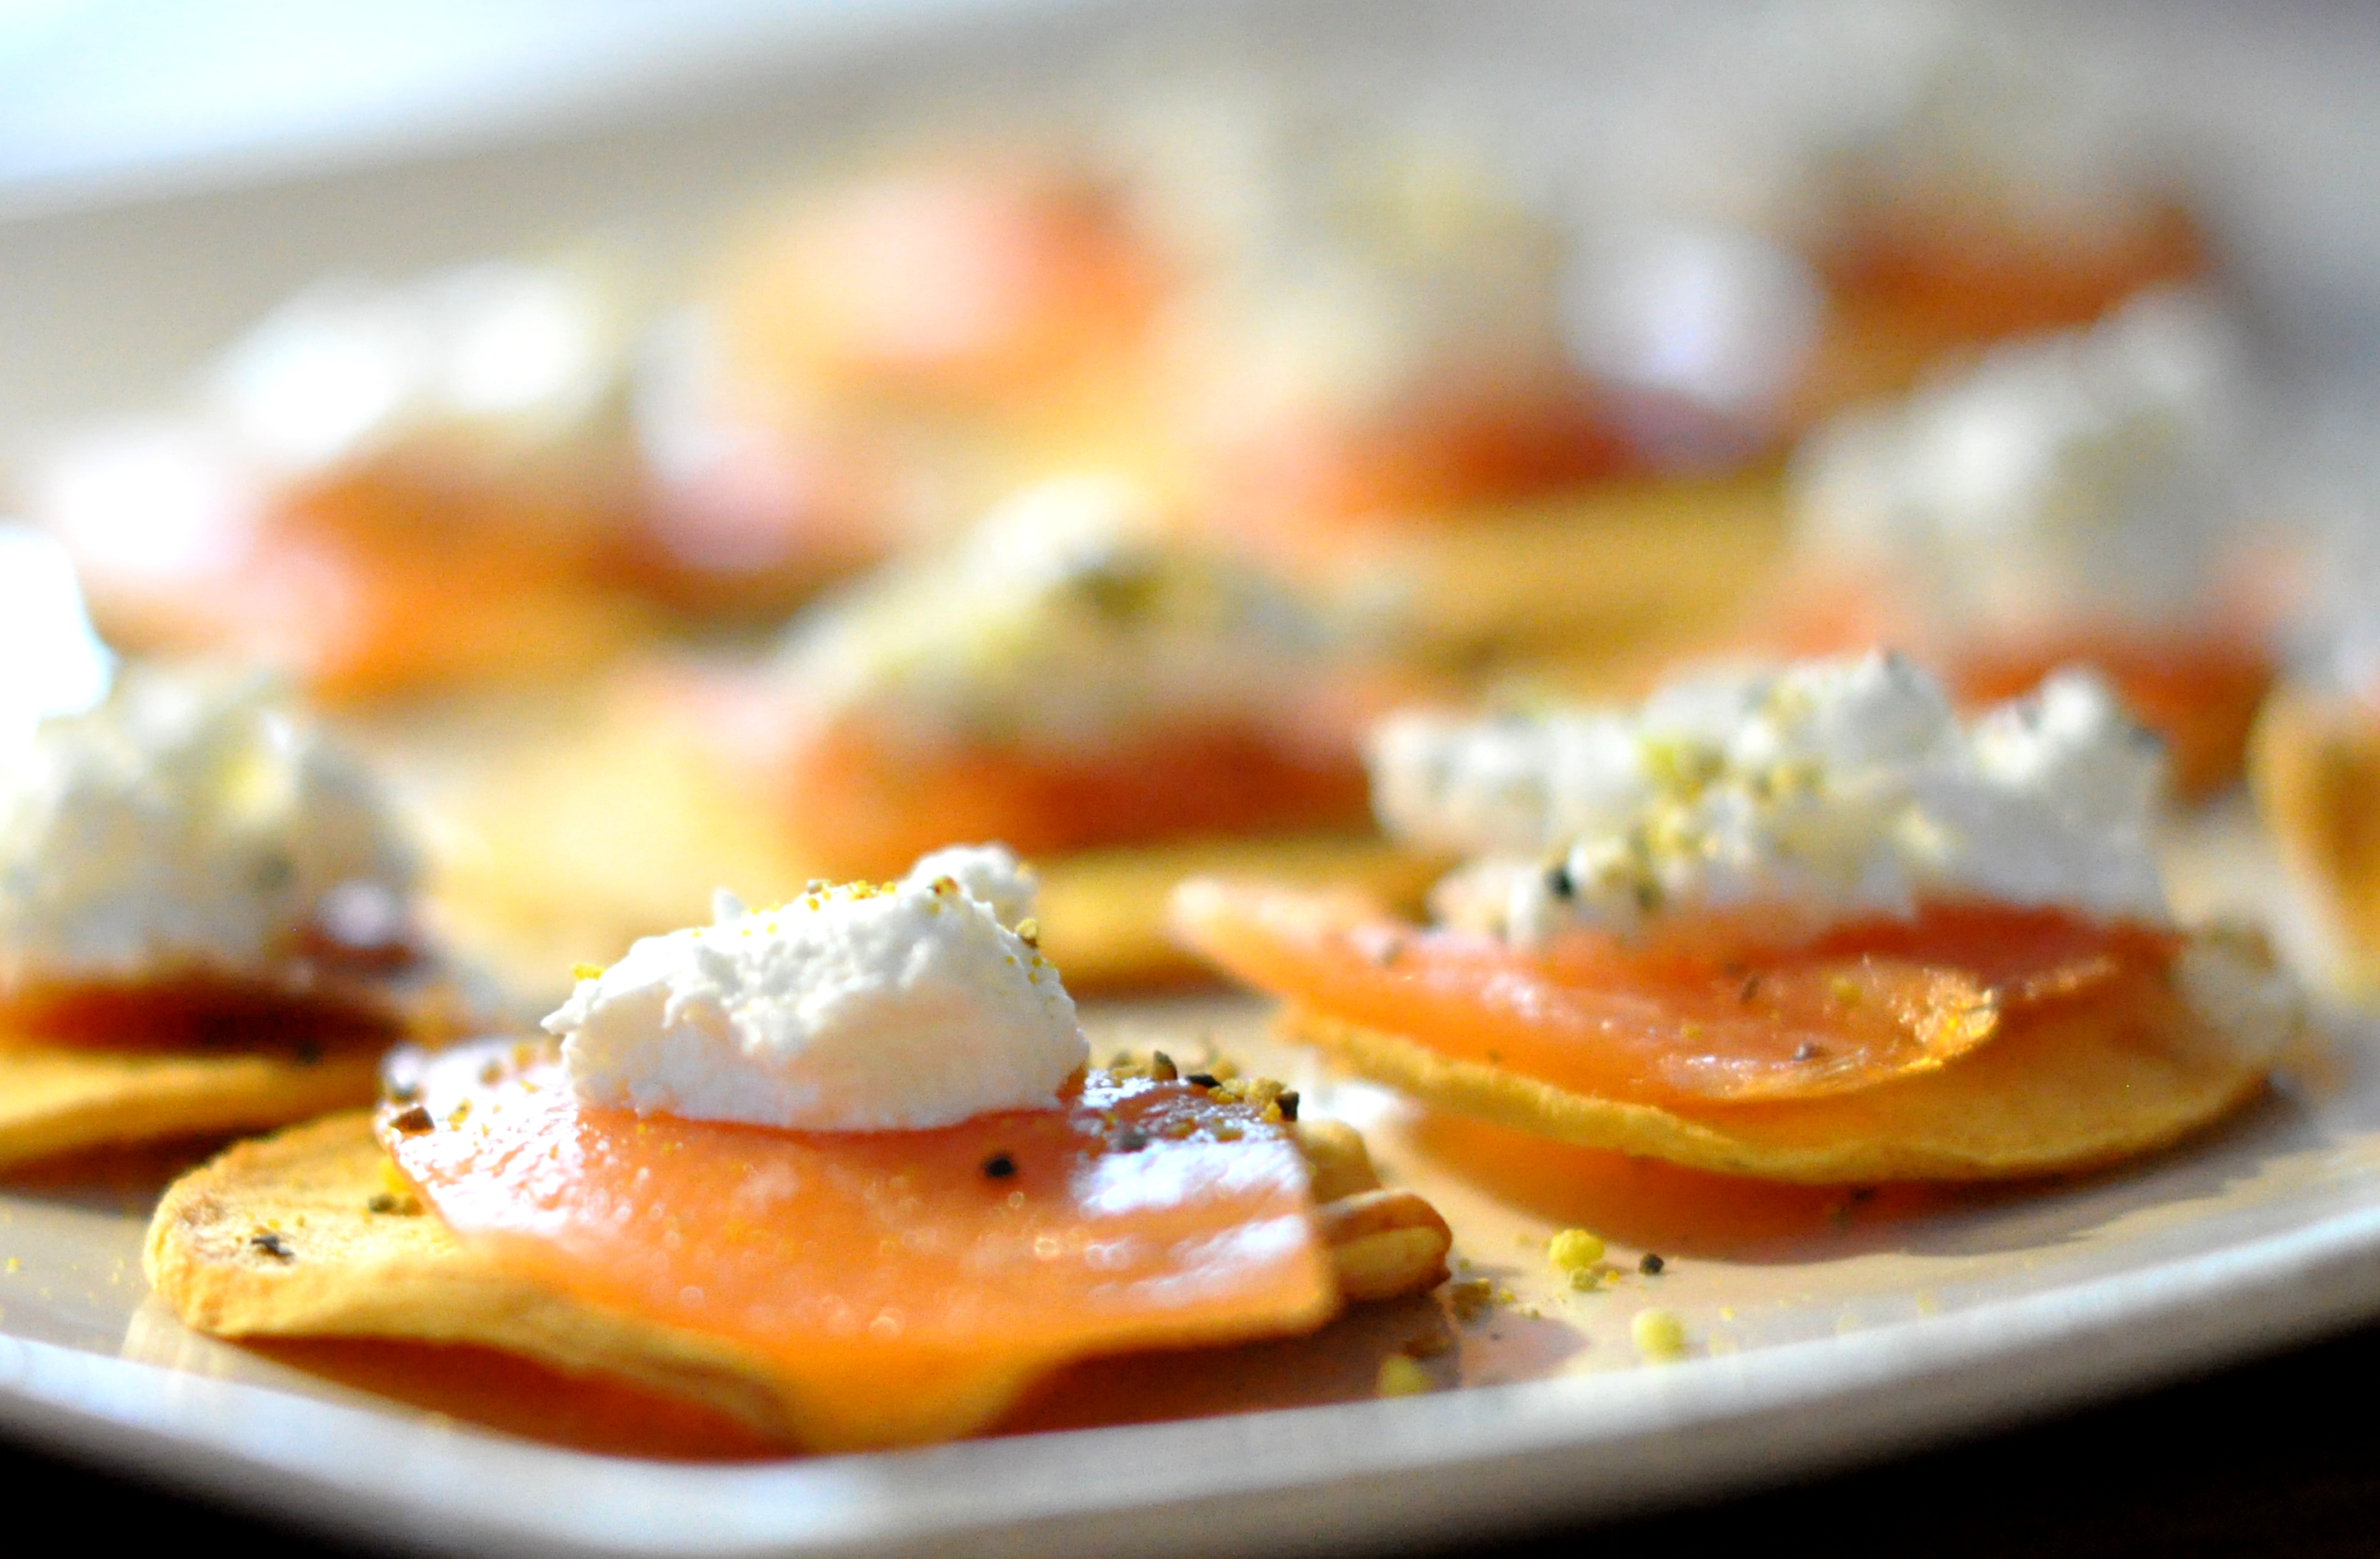 Smoked salmon on apple chips